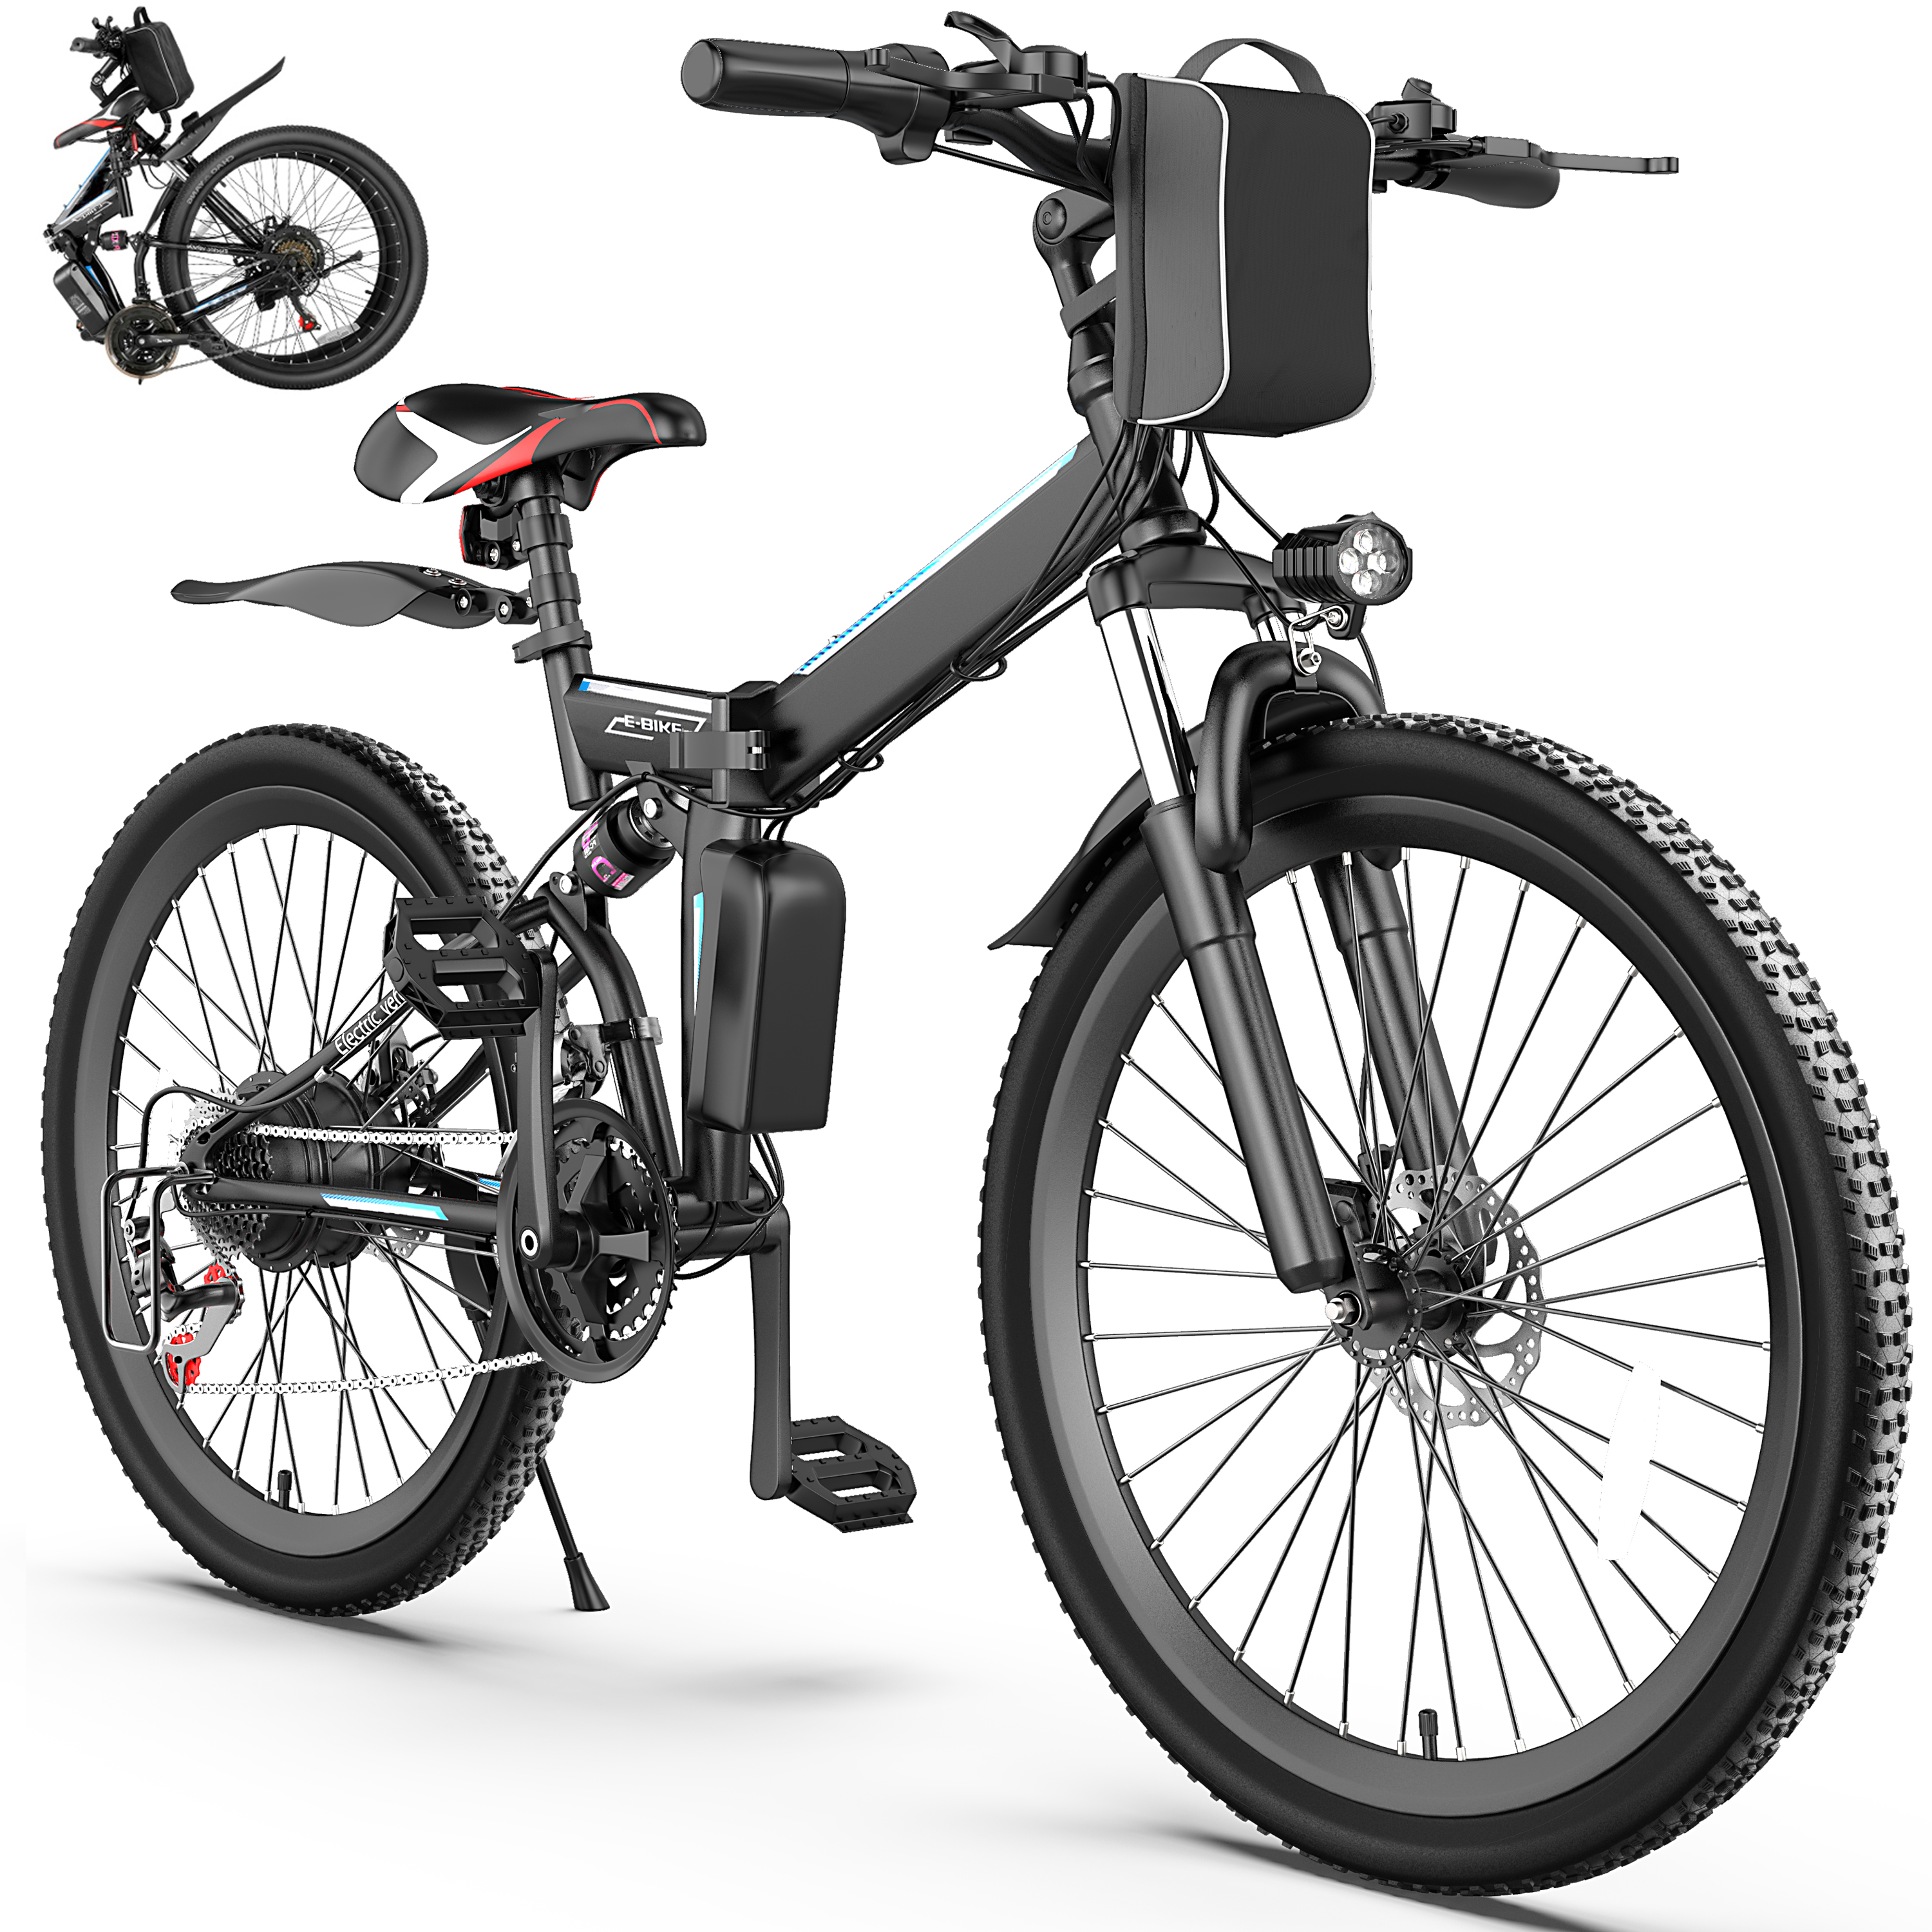 Gocio 500W Folding Electric Bike, 19 mph Electric Commuter Bike Mountain Bicycle, 48V Removable Battery, 21 Speed E-Bike, Compacted Damping Tires, Dual Shock Absorbers for Women Adults Men, UL2849 - image 1 of 11